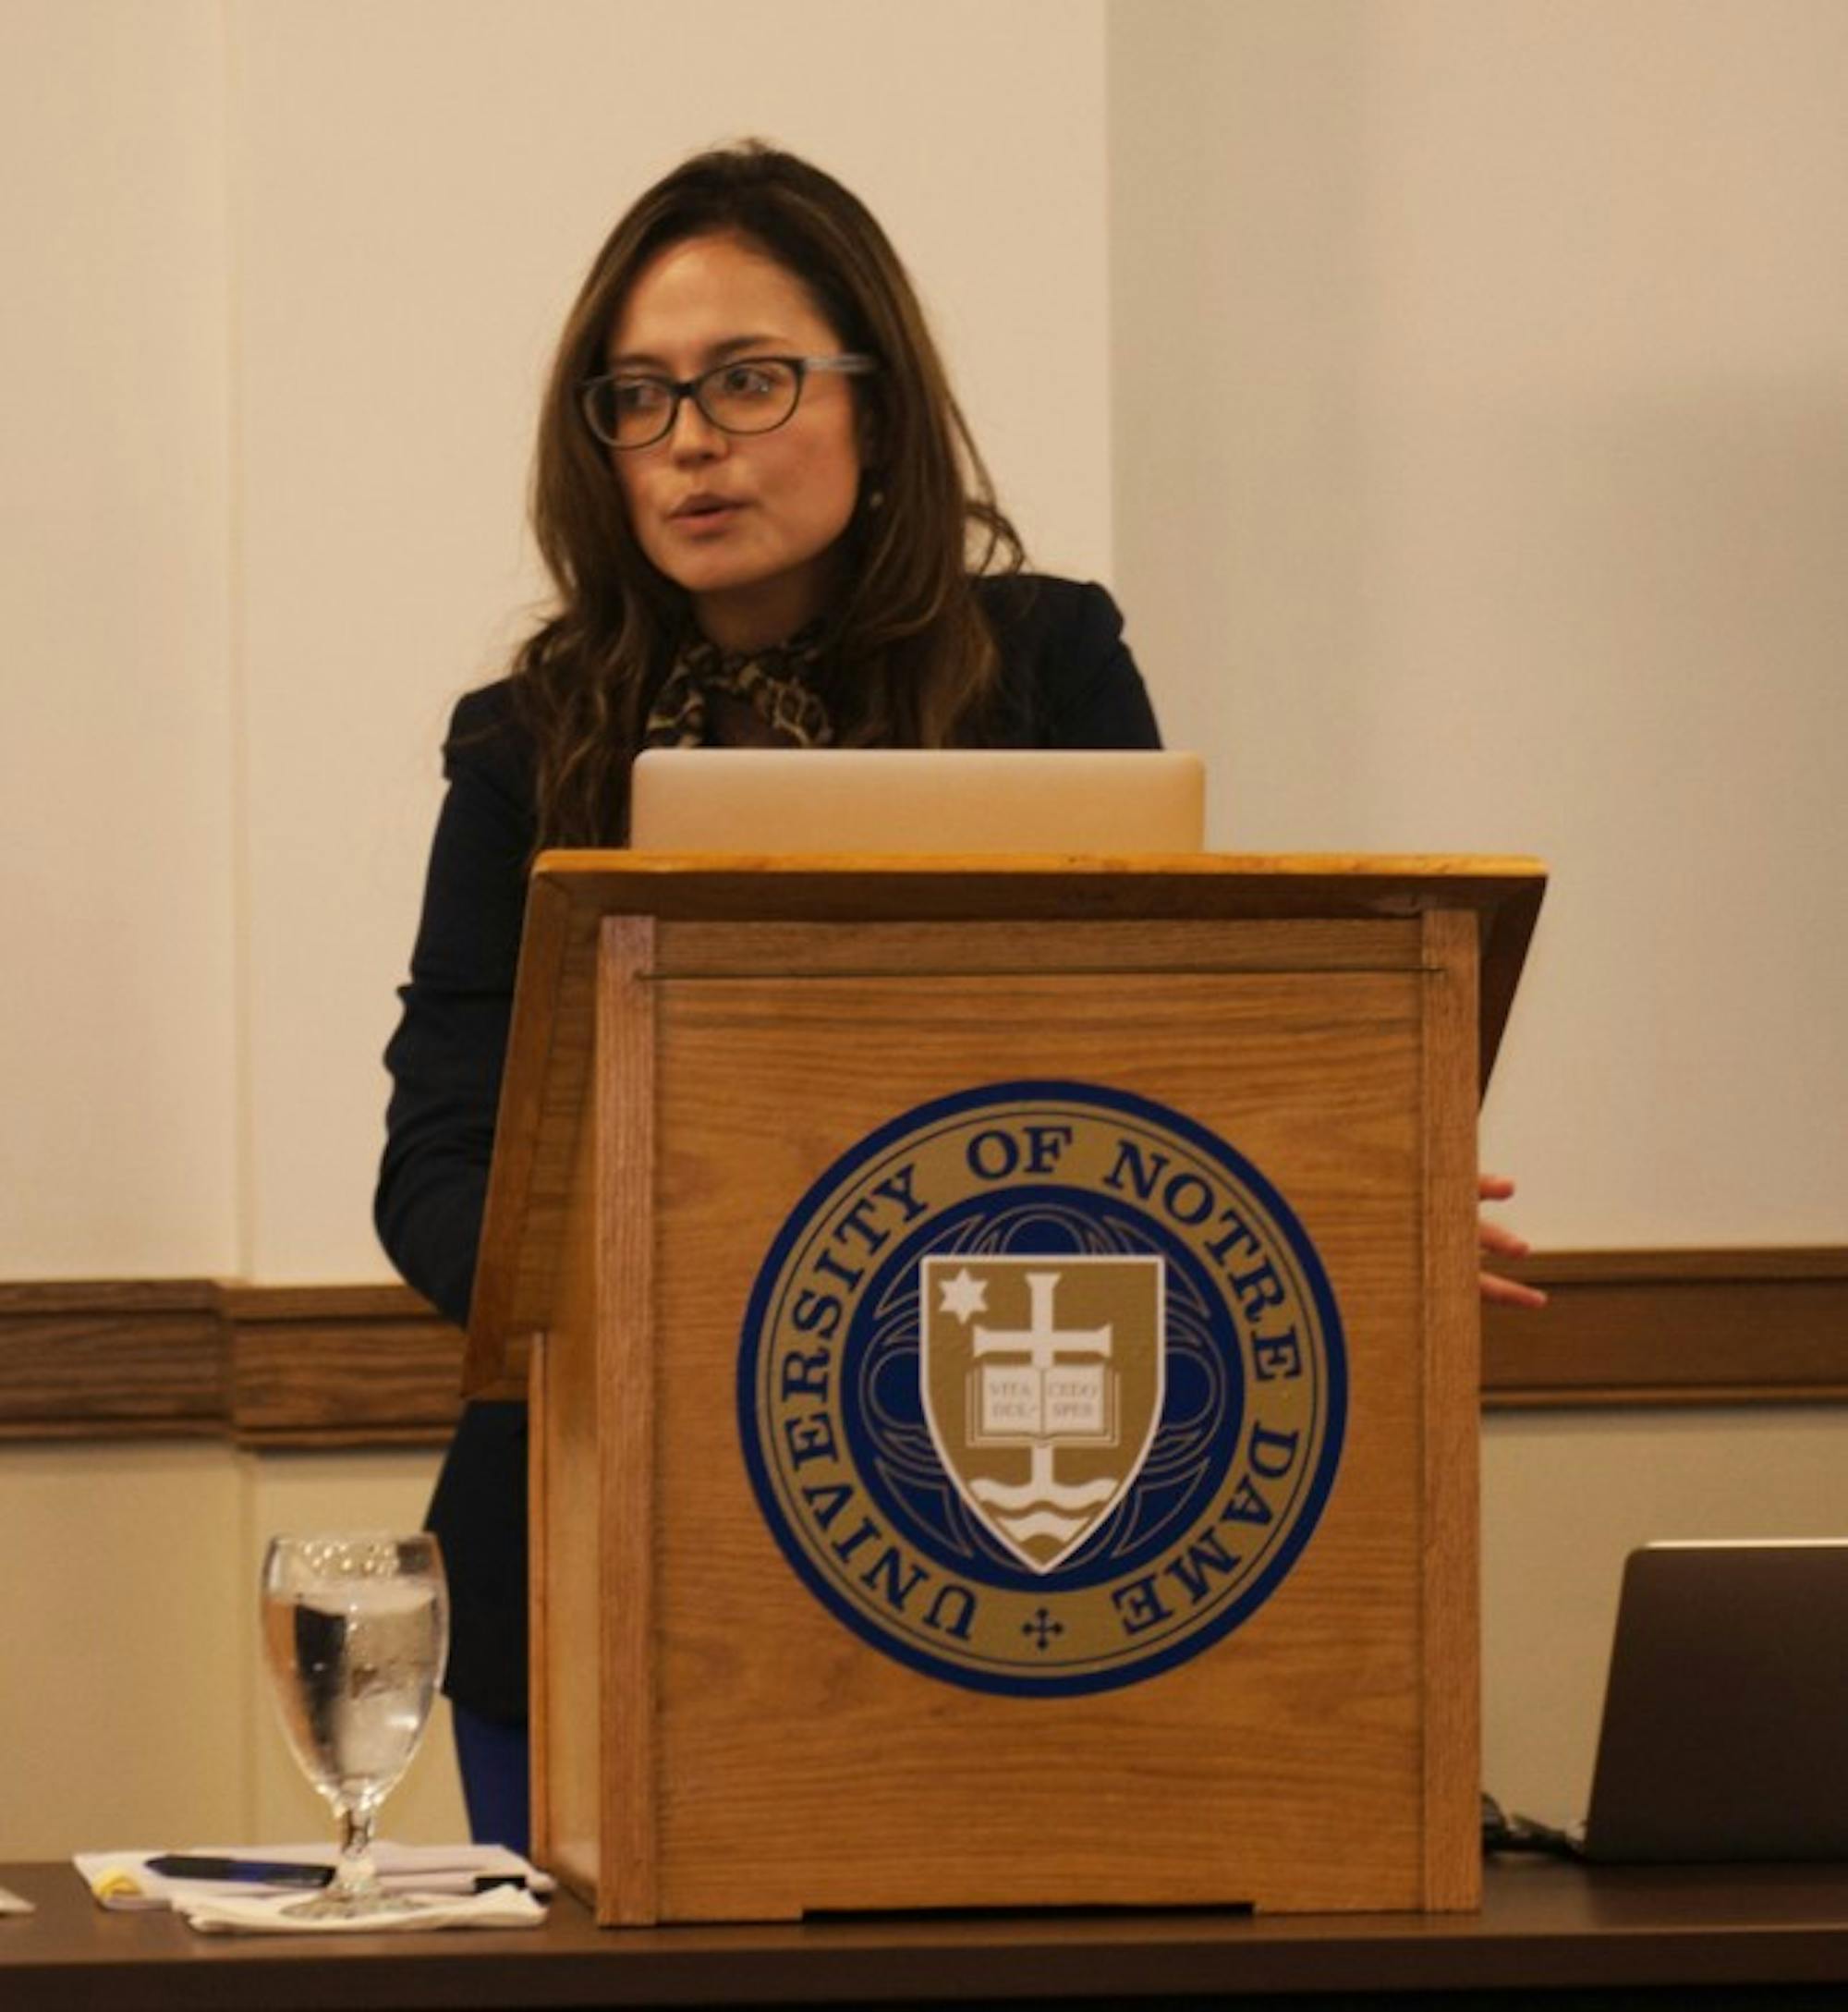 Thana Cristina de Campos, adjunct professor law at the University of Ottawa, lectures about ethical issues facing the pharmaceutical industry in the wake of the global health crisis Wednesday in Nanovic Hall.